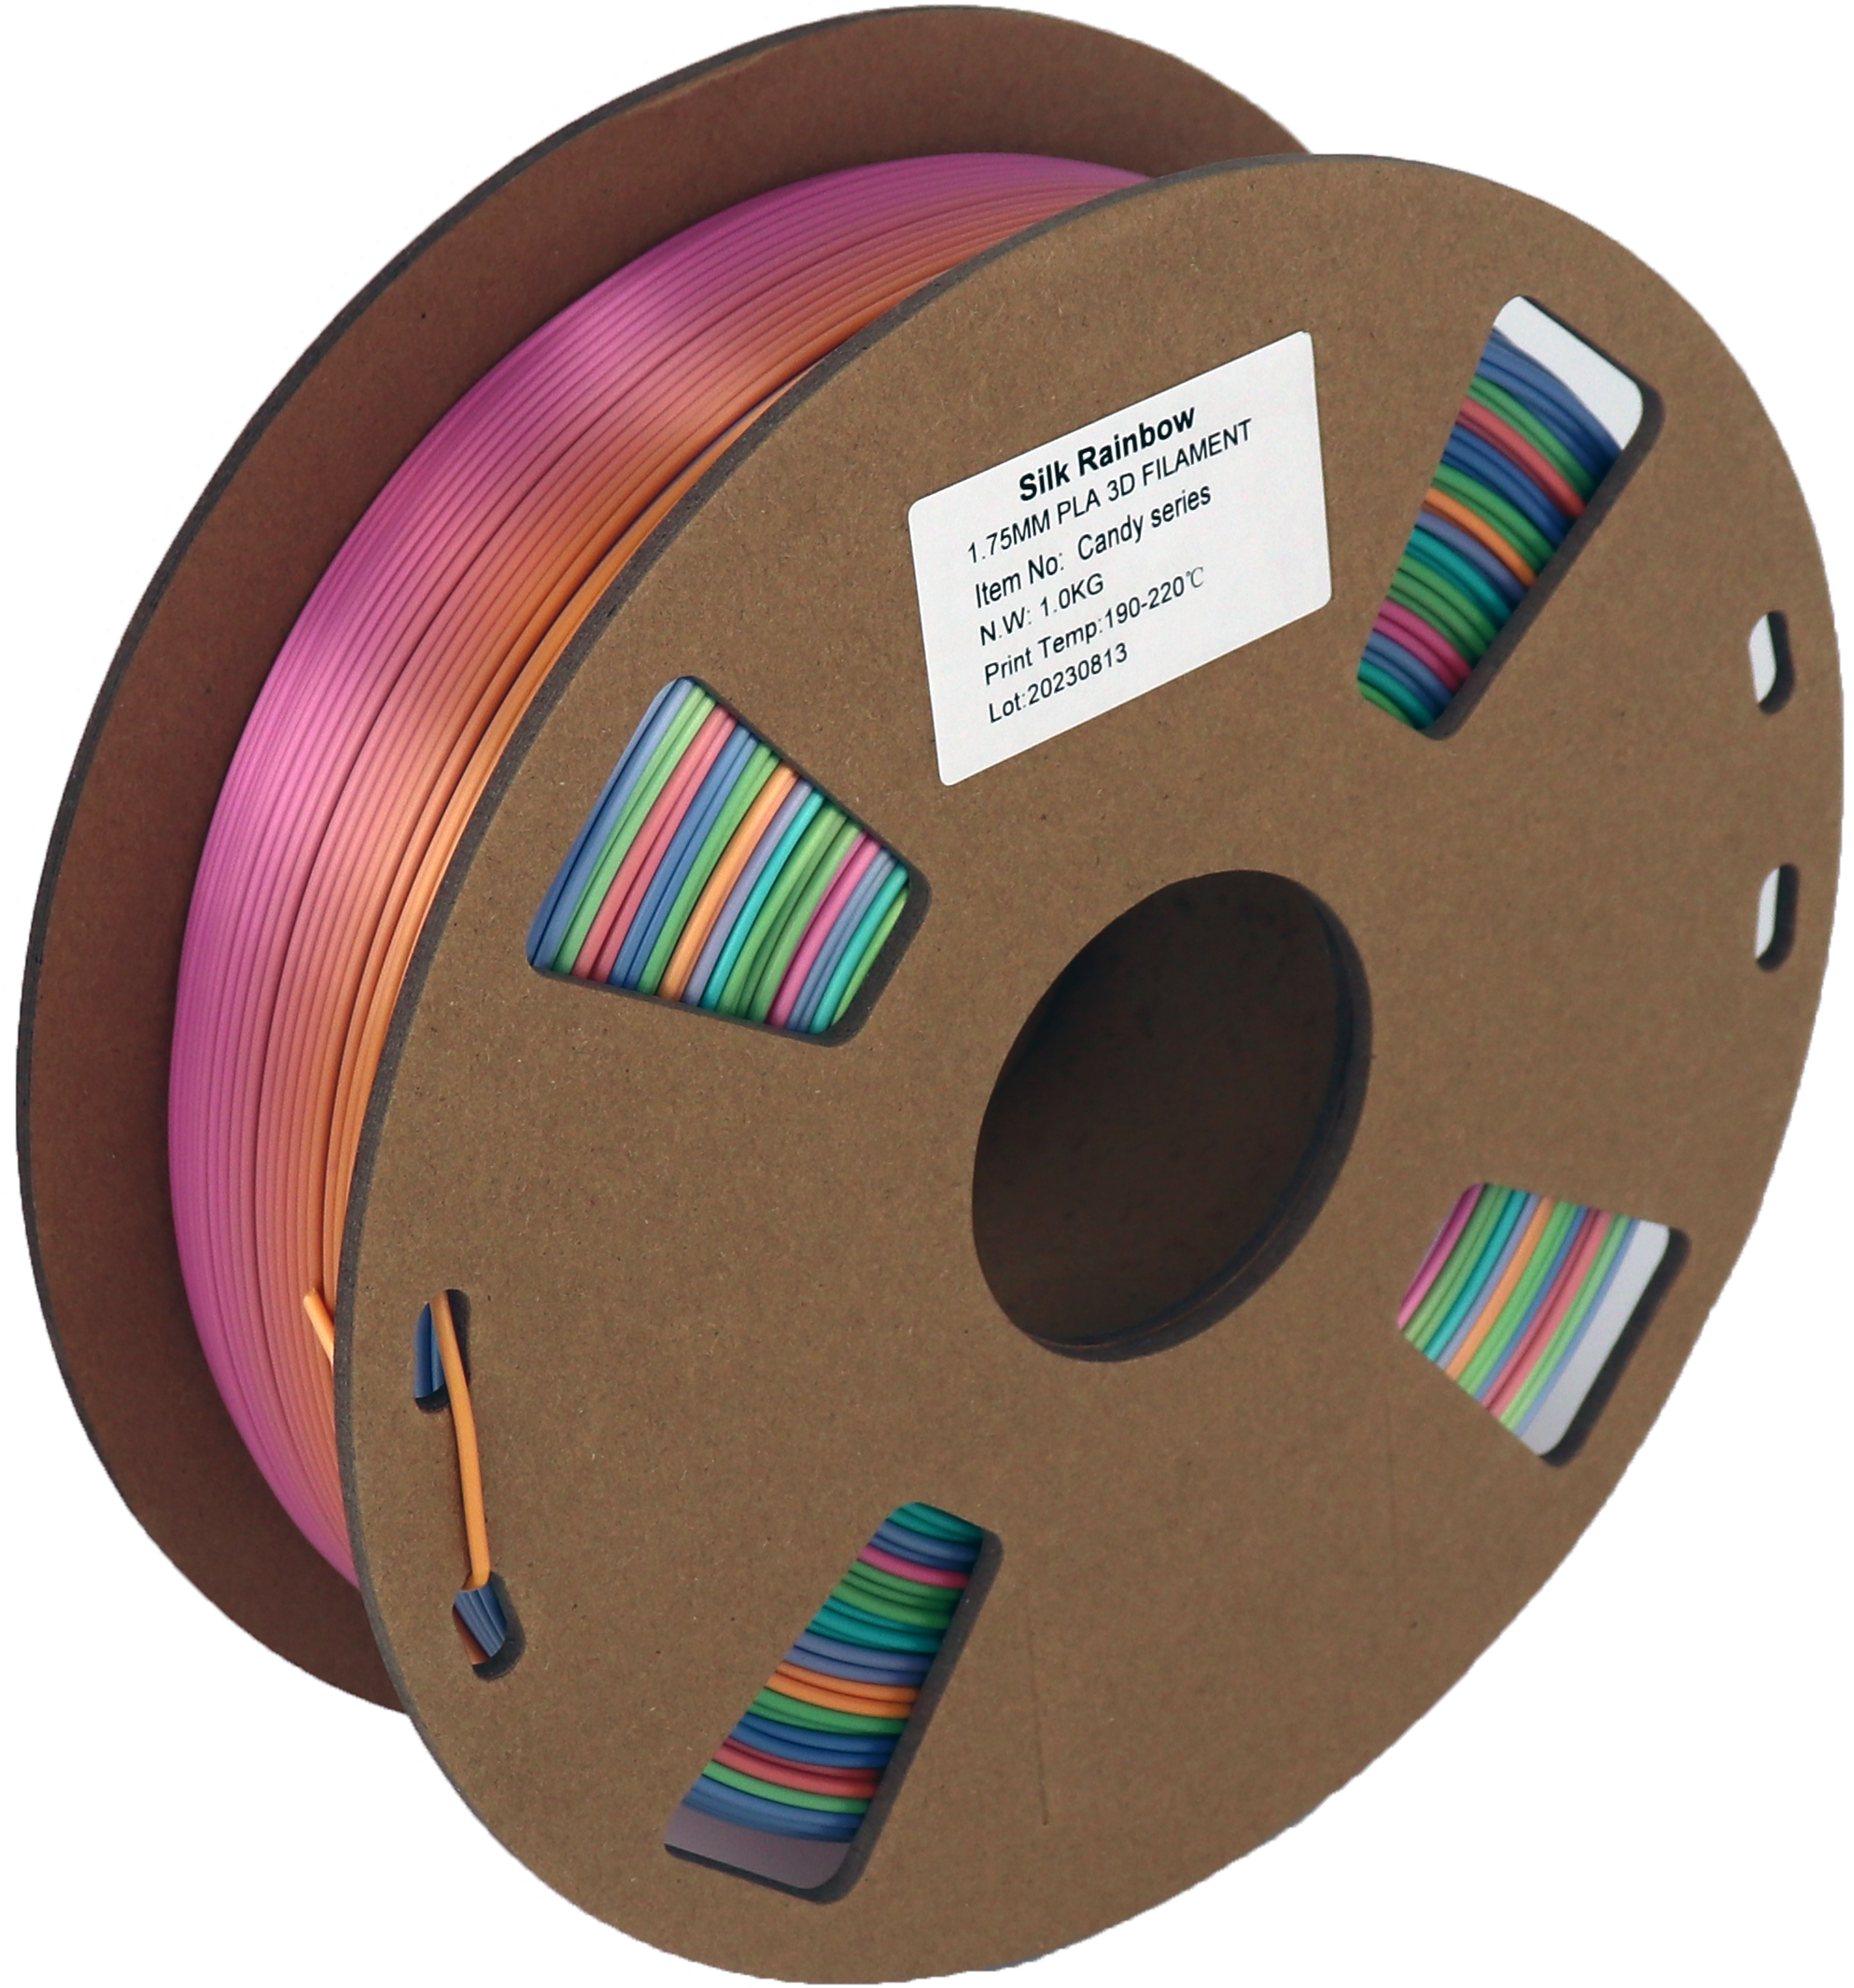 PS Imports PLA 1.75mm x Silk Rainbow Candy Series